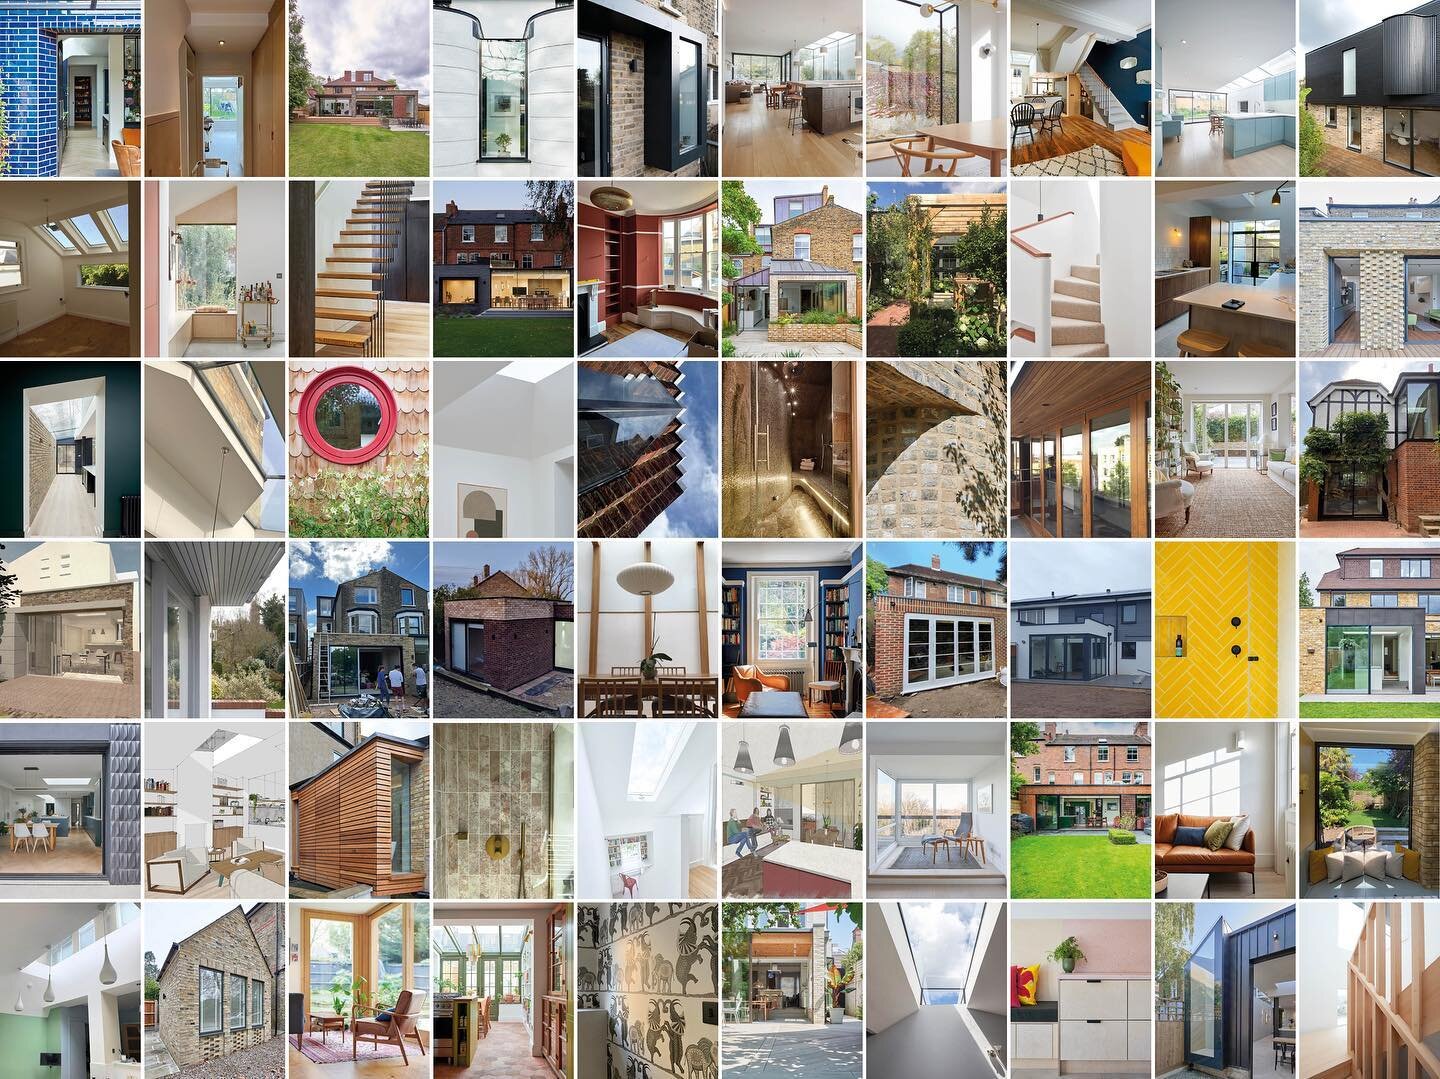 In case you somehow missed it, we&rsquo;re turning 10!

10 years and 60 completed projects. What an achievement for a small team. A massive, massive thank you to everyone who helped with each and every one of these. We believe that good architecture 